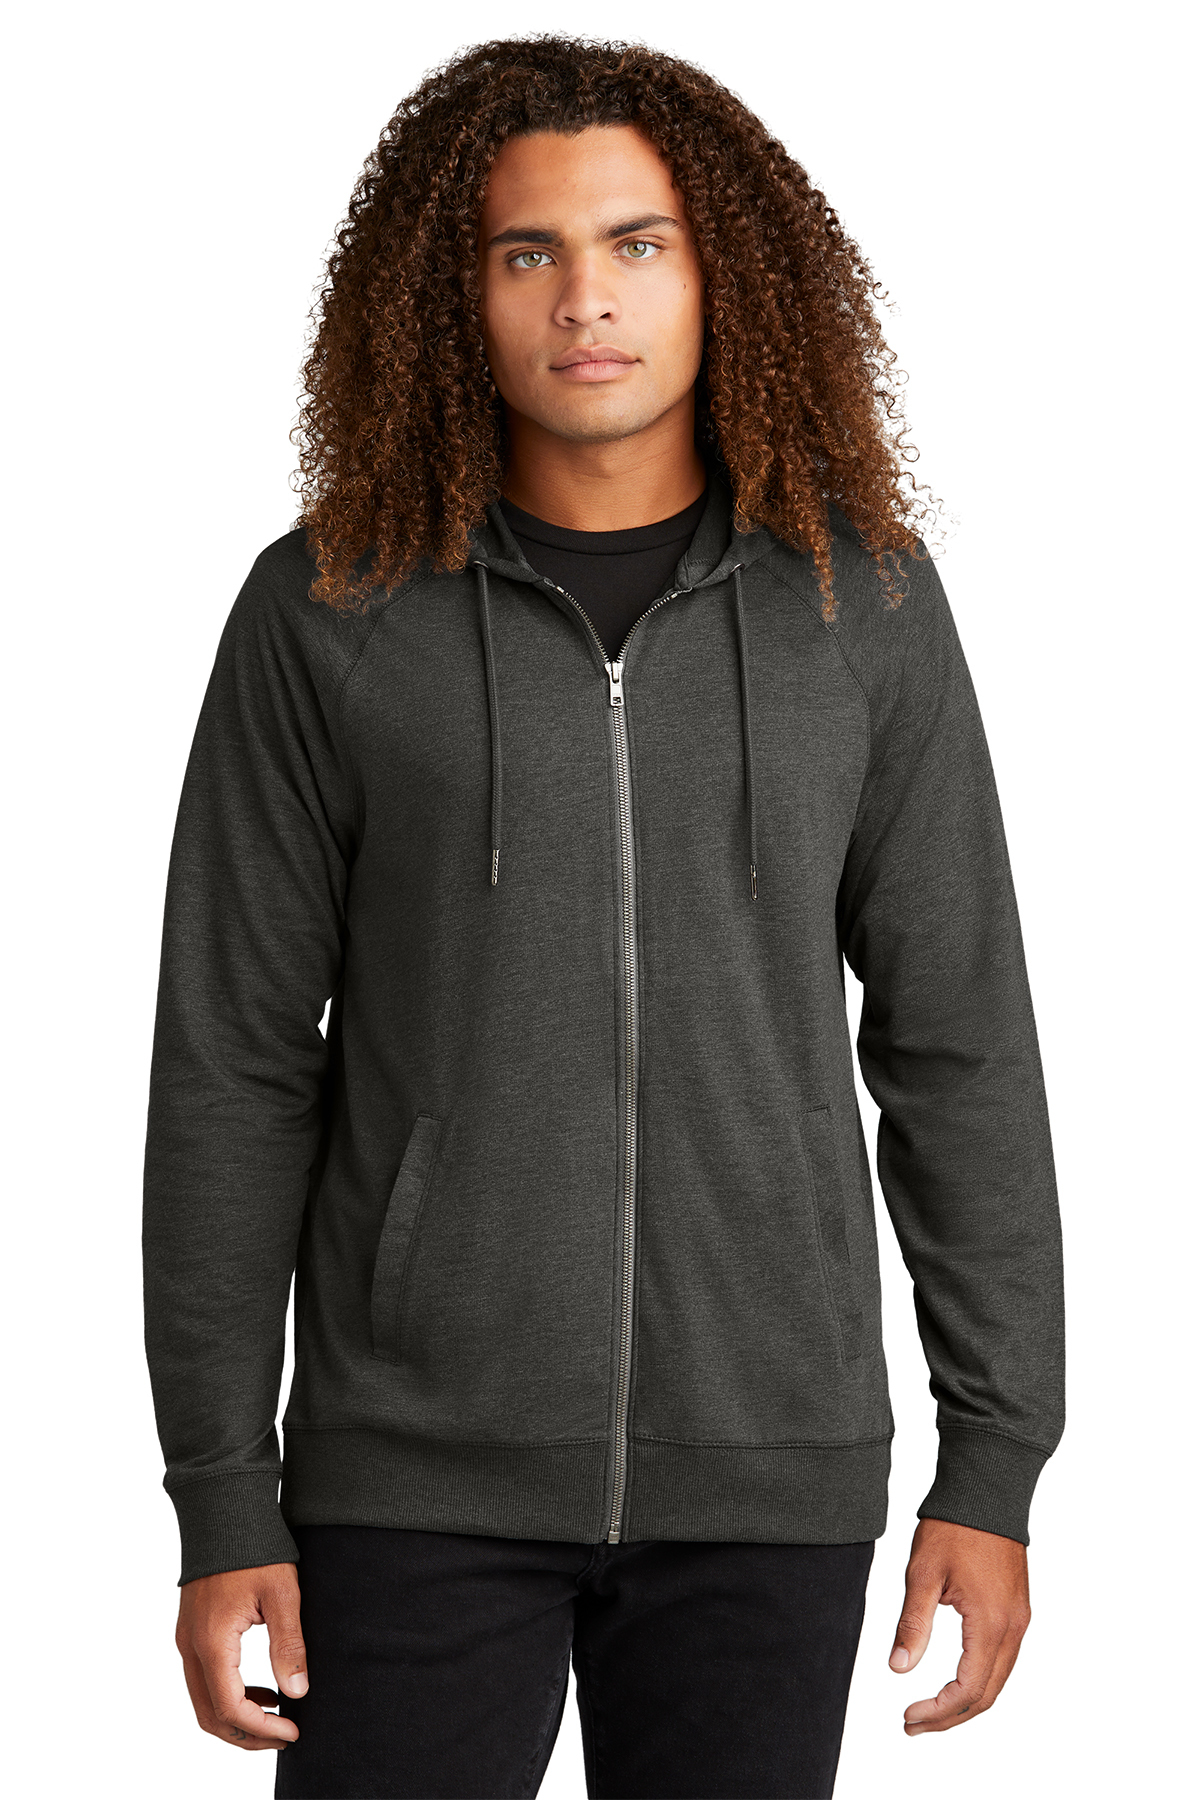 District Featherweight French Terry Full-Zip Hoodie | Product | District